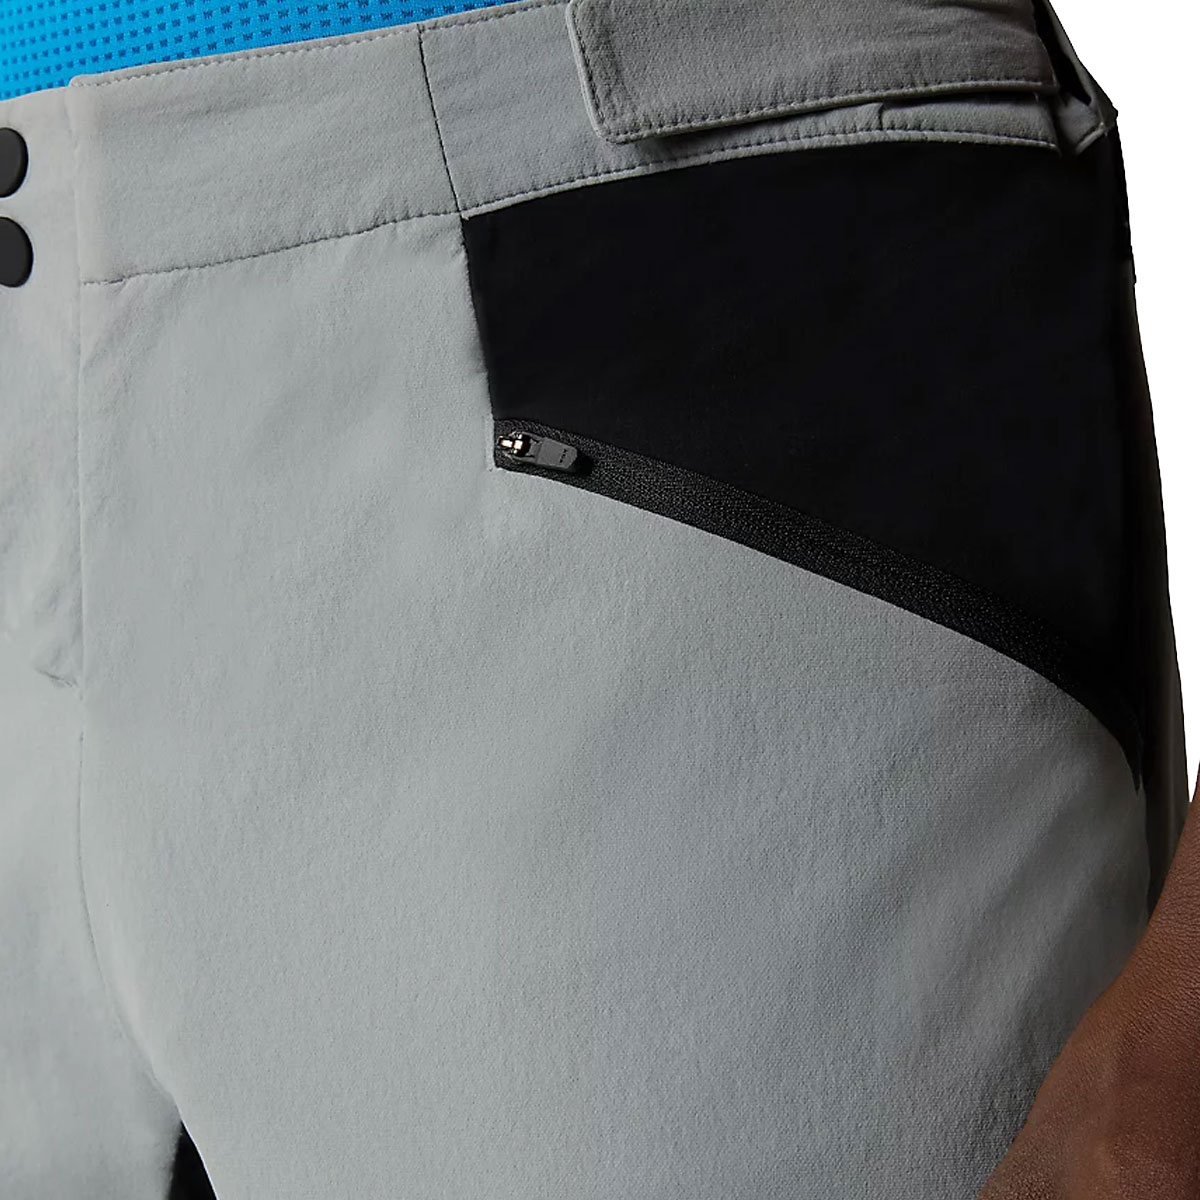 THE NORTH FACE - TRAILJAMMER SHORTS